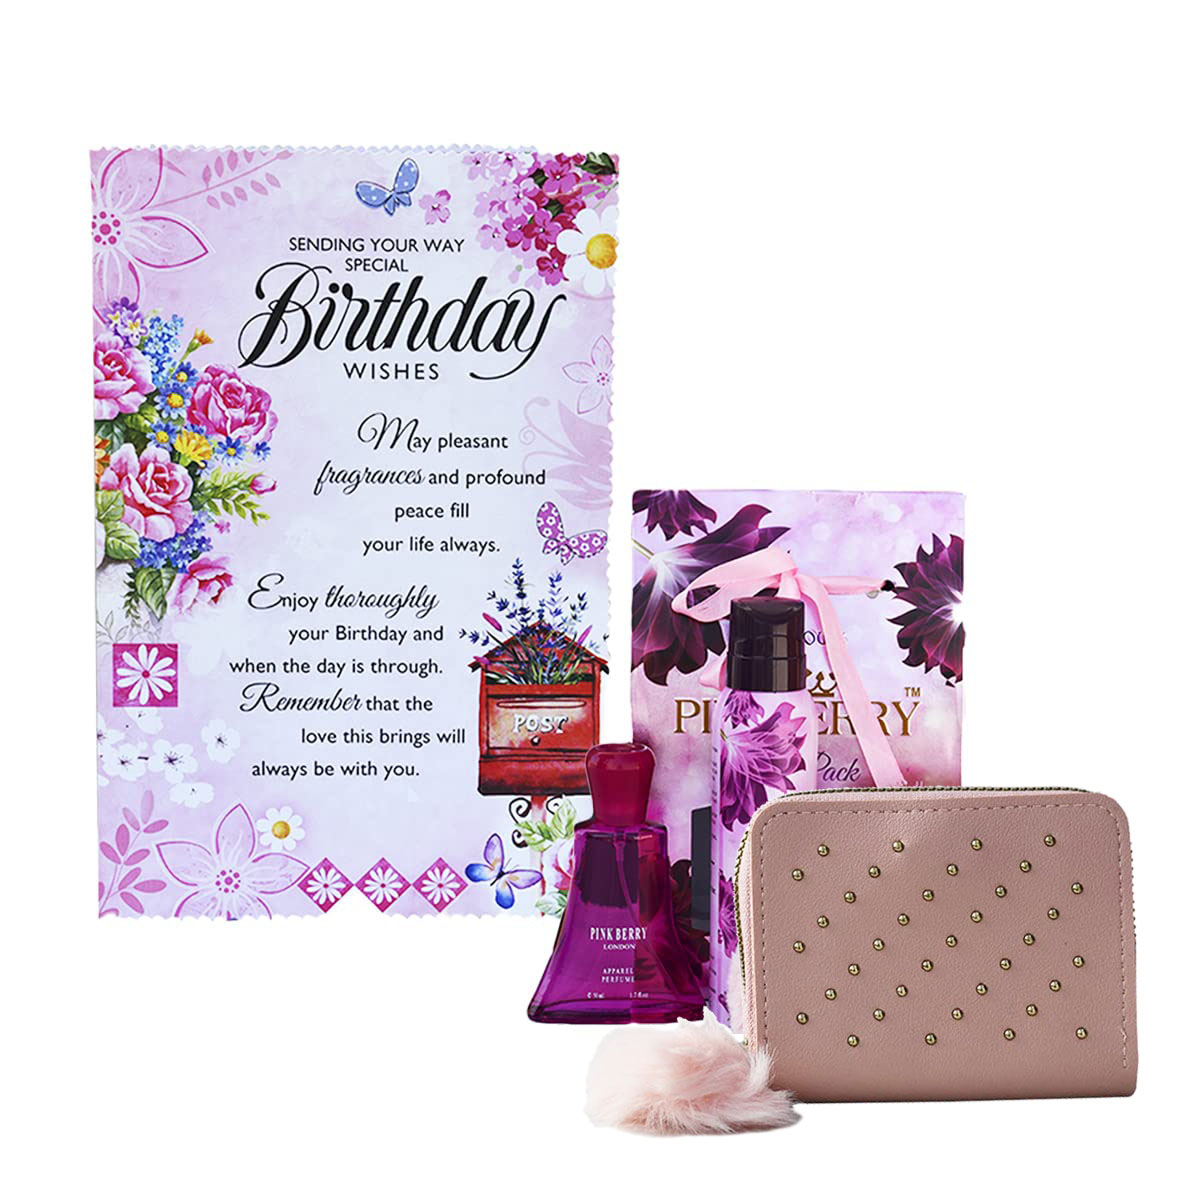 Personalised Tiara Gift Box | Perfect Birthday Gift For Her